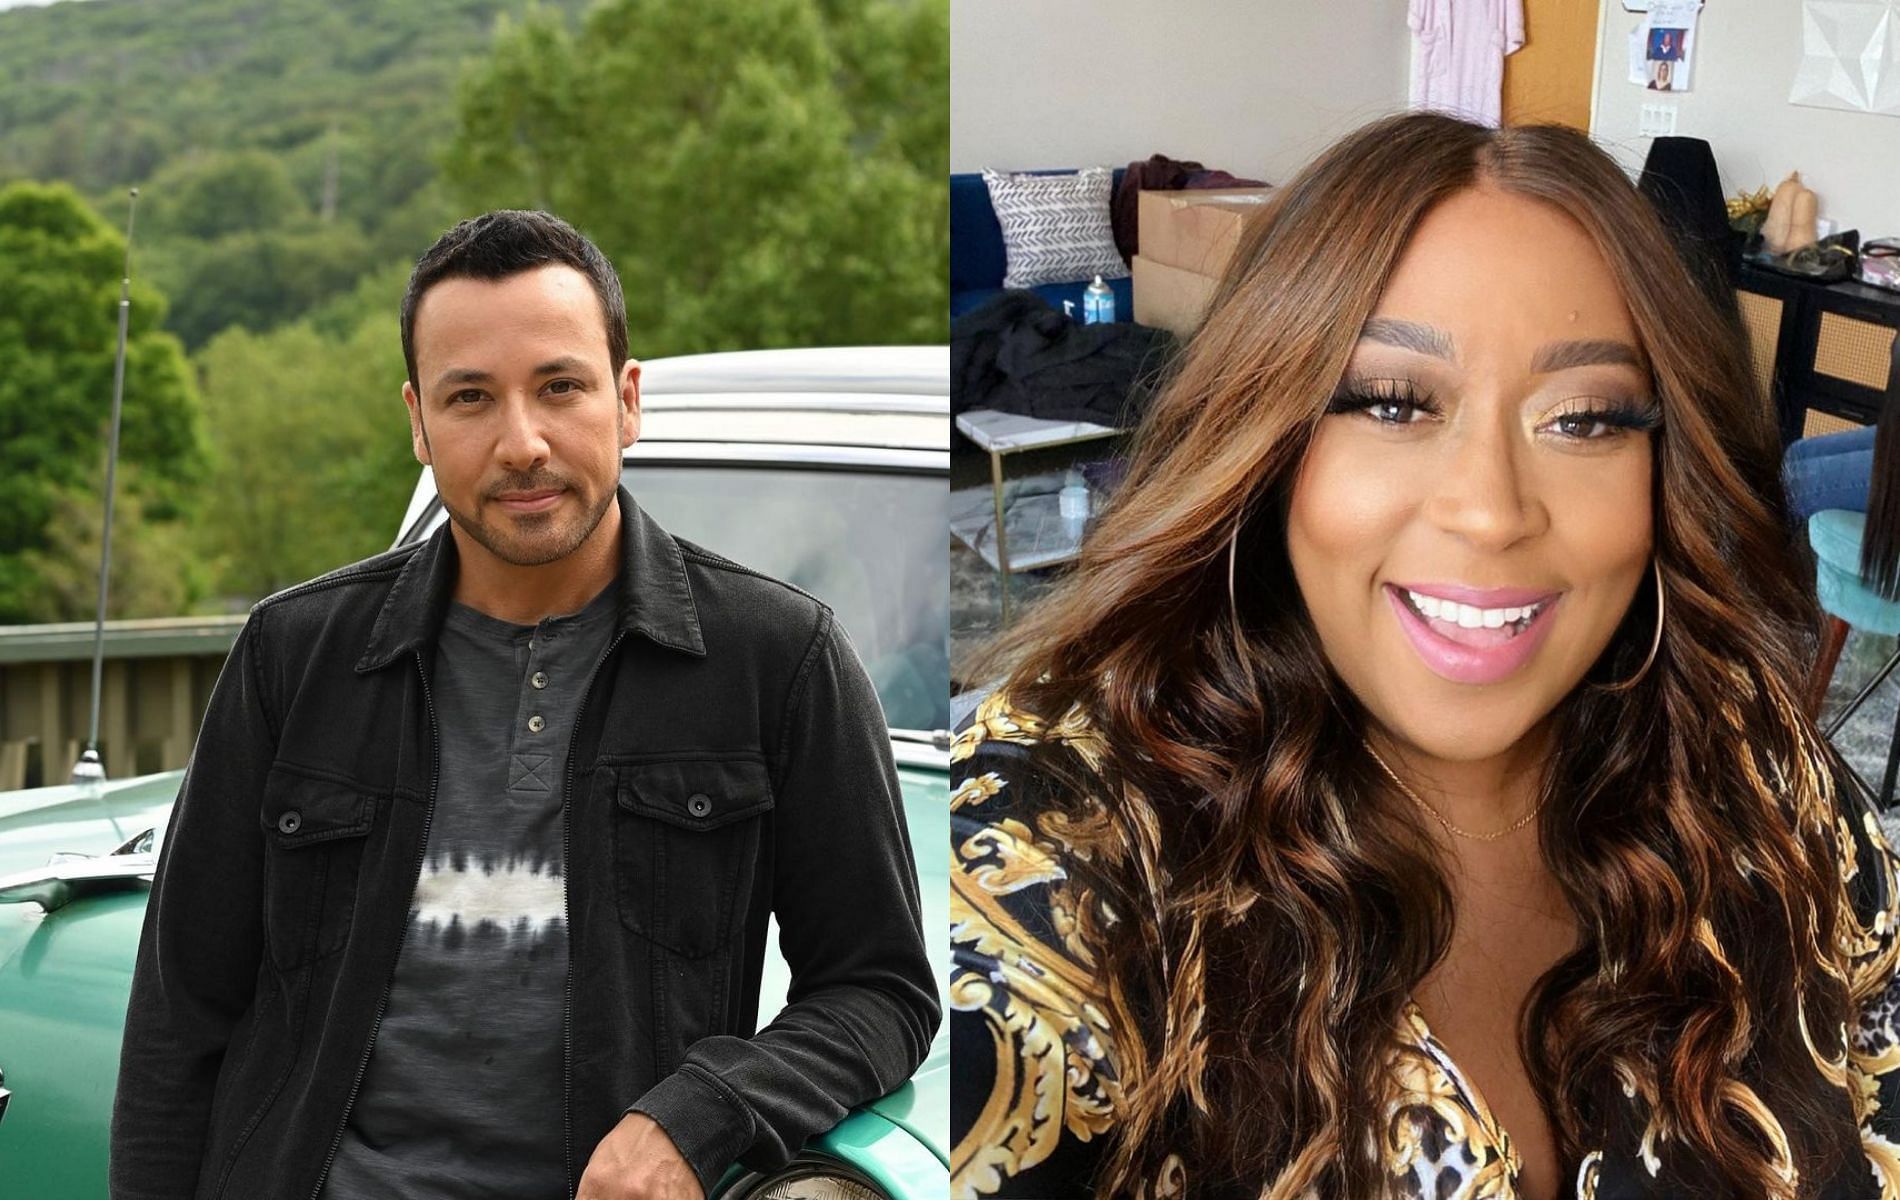 Howie Dorough and Loni Love eliminated from The Real Dirty Dancing (Image via howie_dorough, comiclonilove/Instagram)